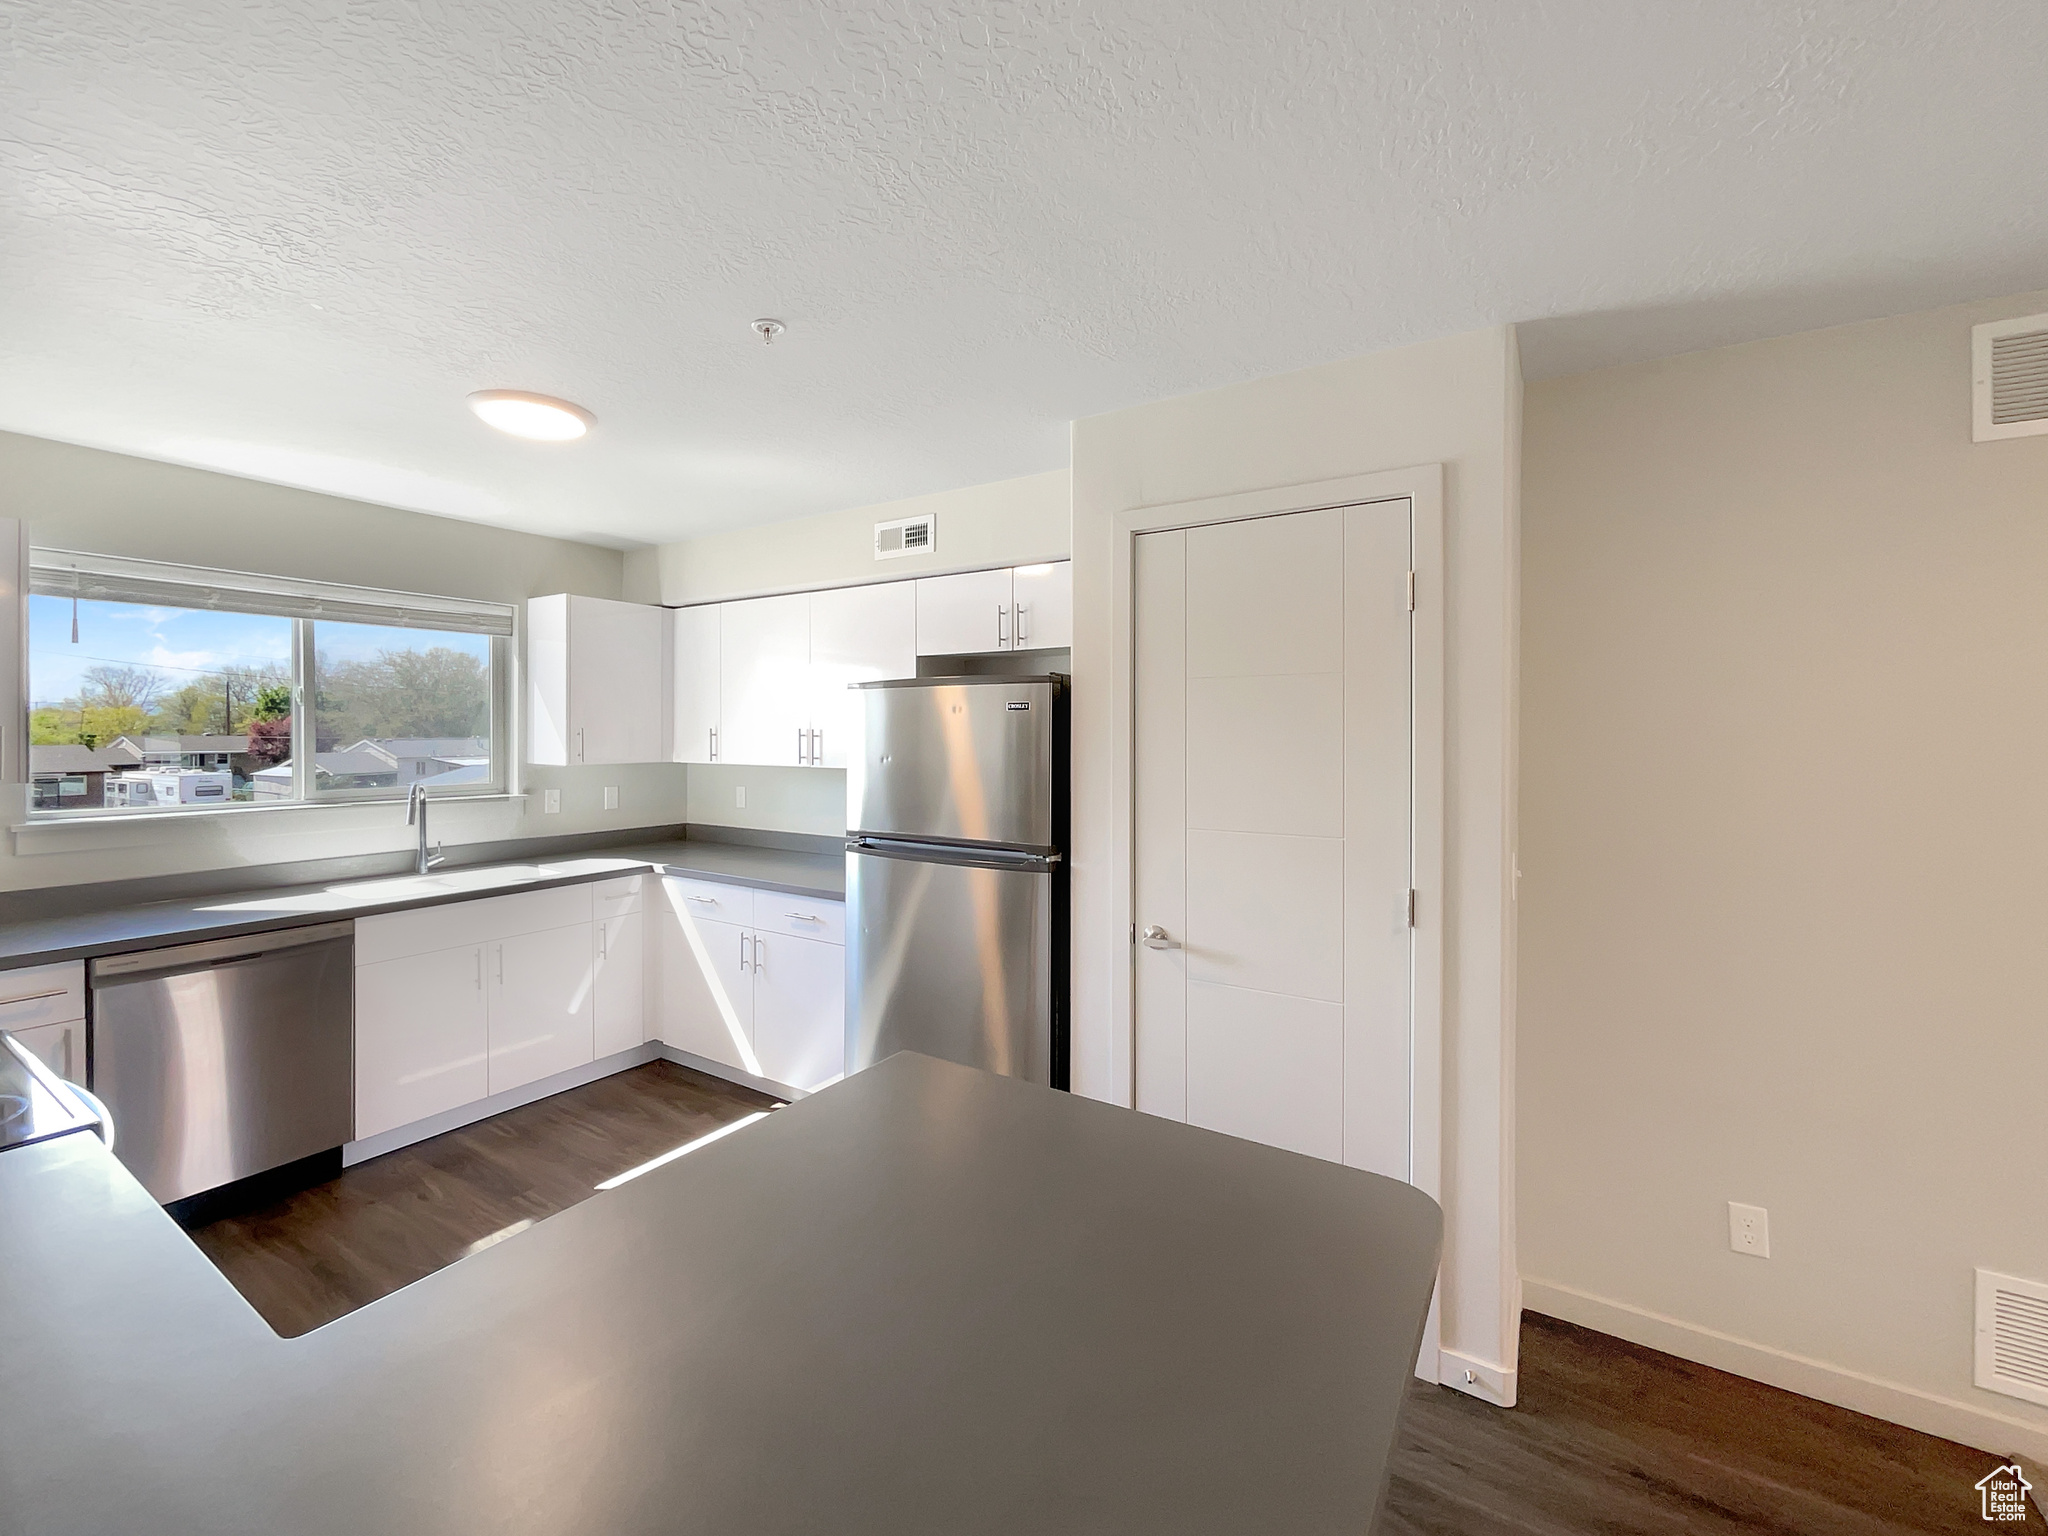 Kitchen featuring sink, appliances with stainless steel finishes, white cabinetry, and dark wood-type flooring